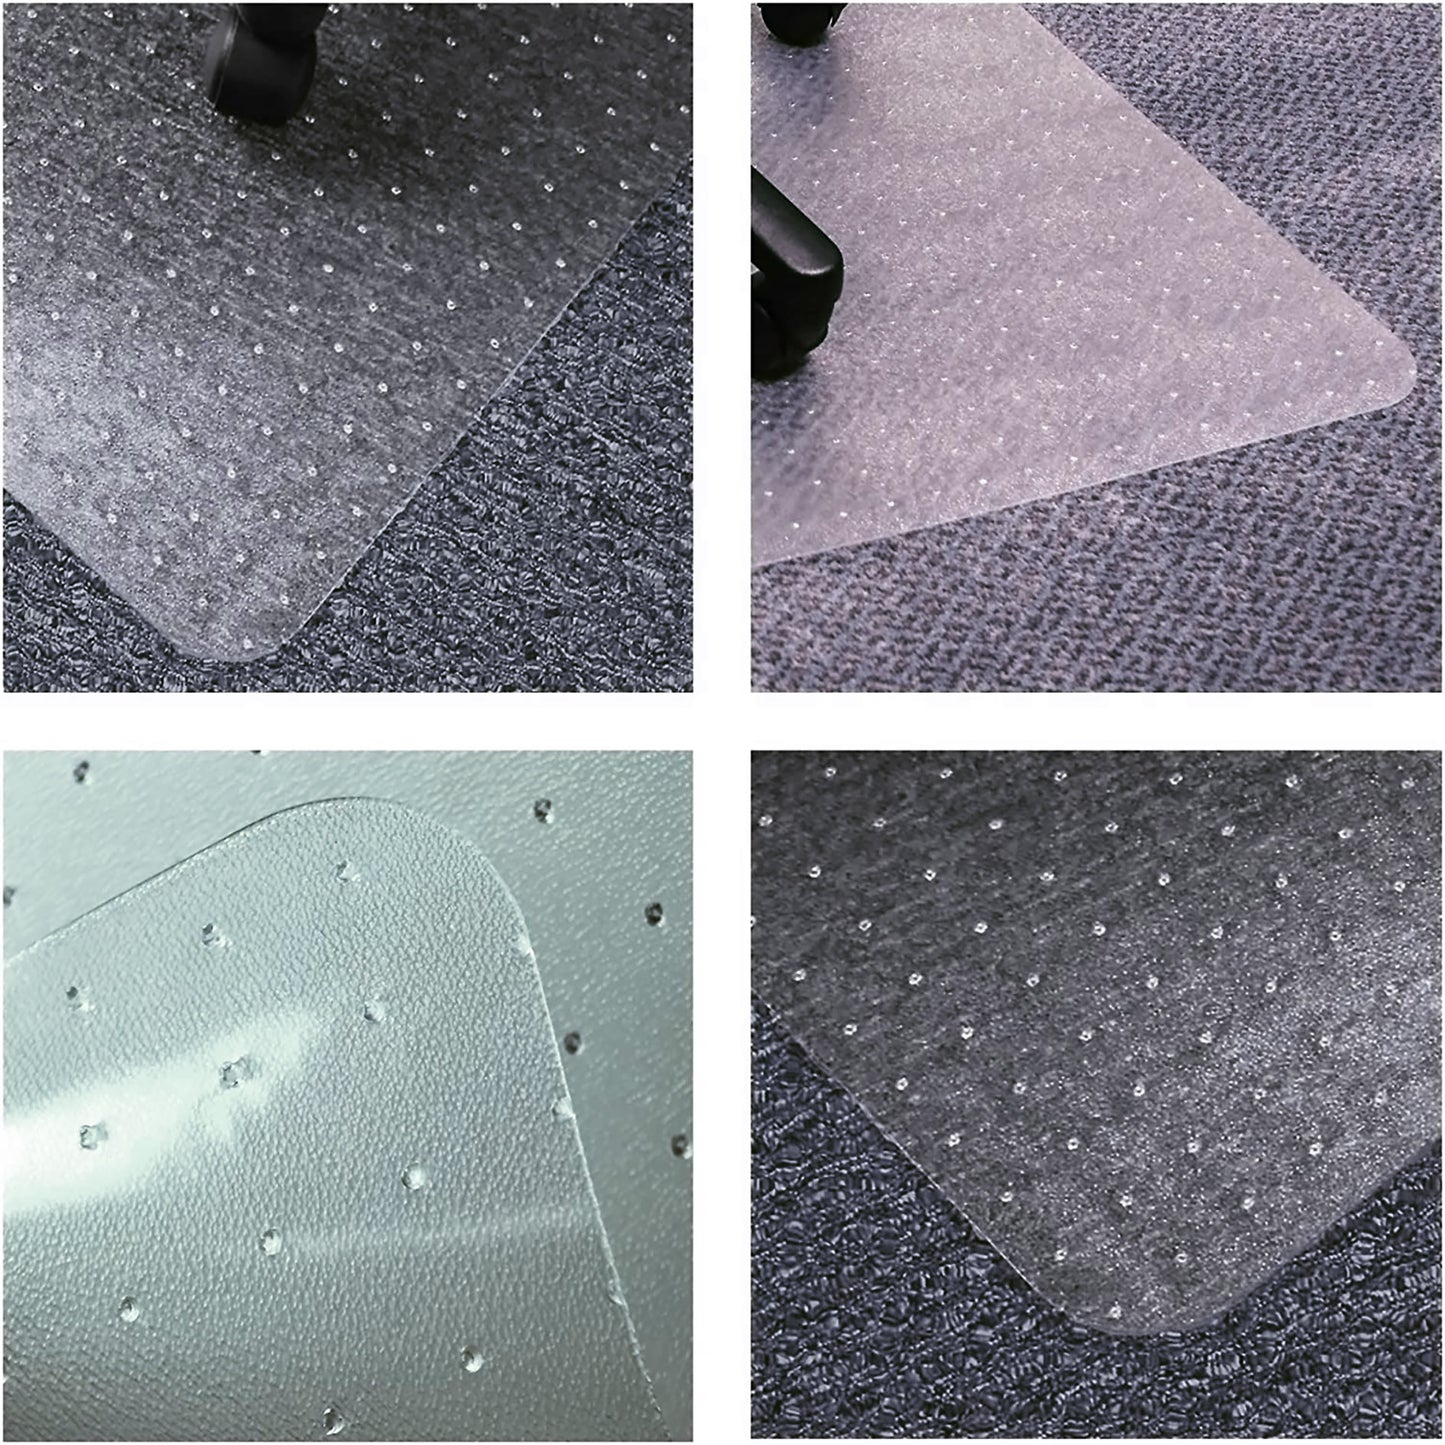 PVC Office Floor Protector - Unrolled Chair Mat Suitable for Low Pile Carpet Floors - Non Slip - 90cm x 120cm - UK Made